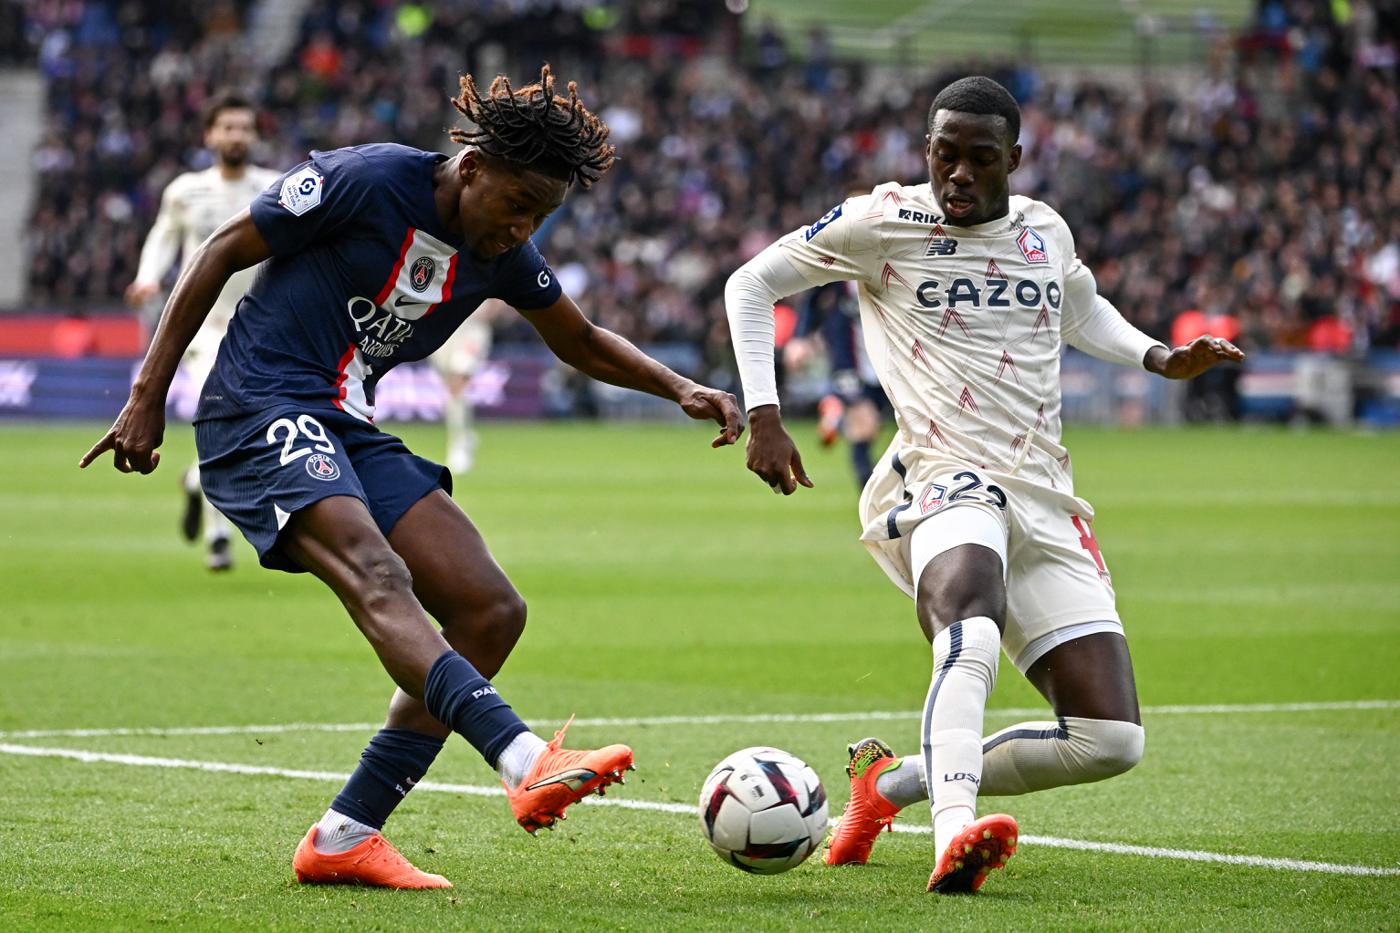 PSG - Lille - 4:3. French Championship, 24th round. Match review, statistics